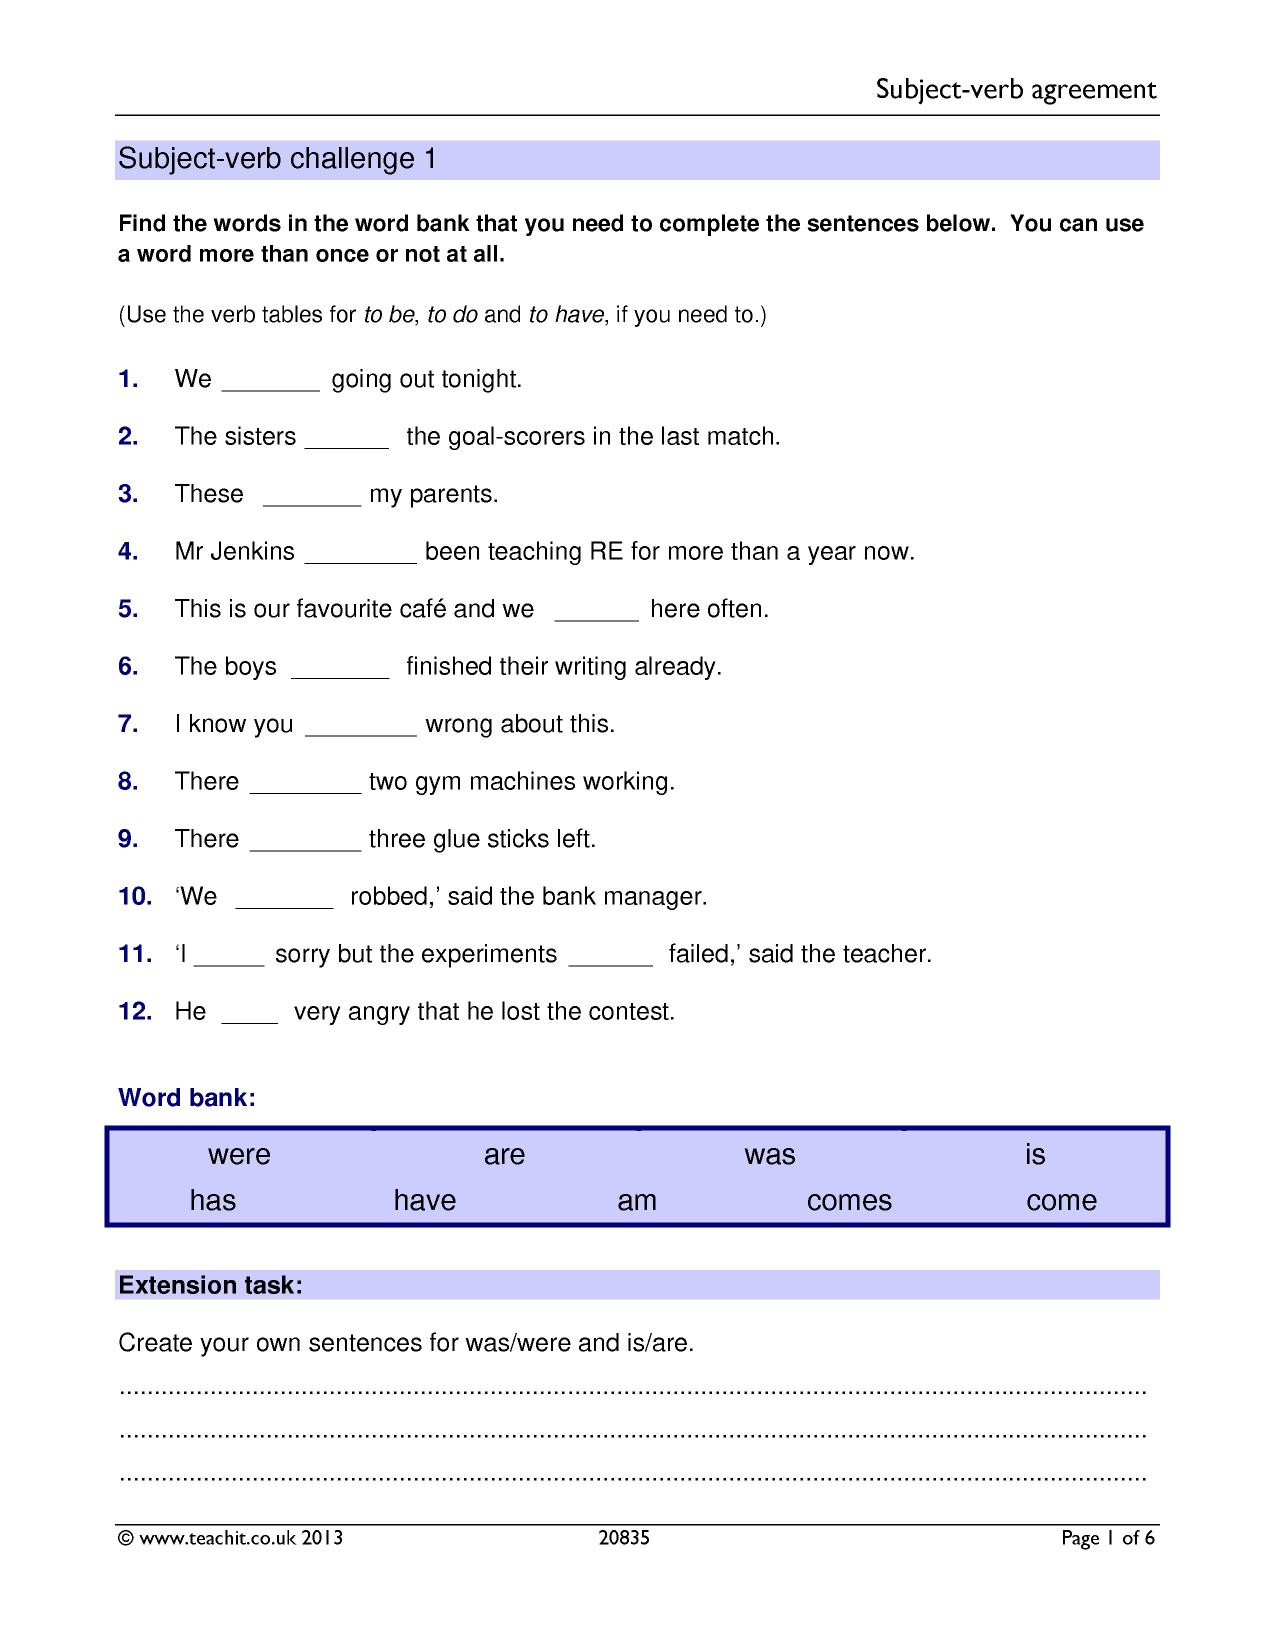 Subject Verb Agreement Quiz With Answer Keys Subject Verb Agreement